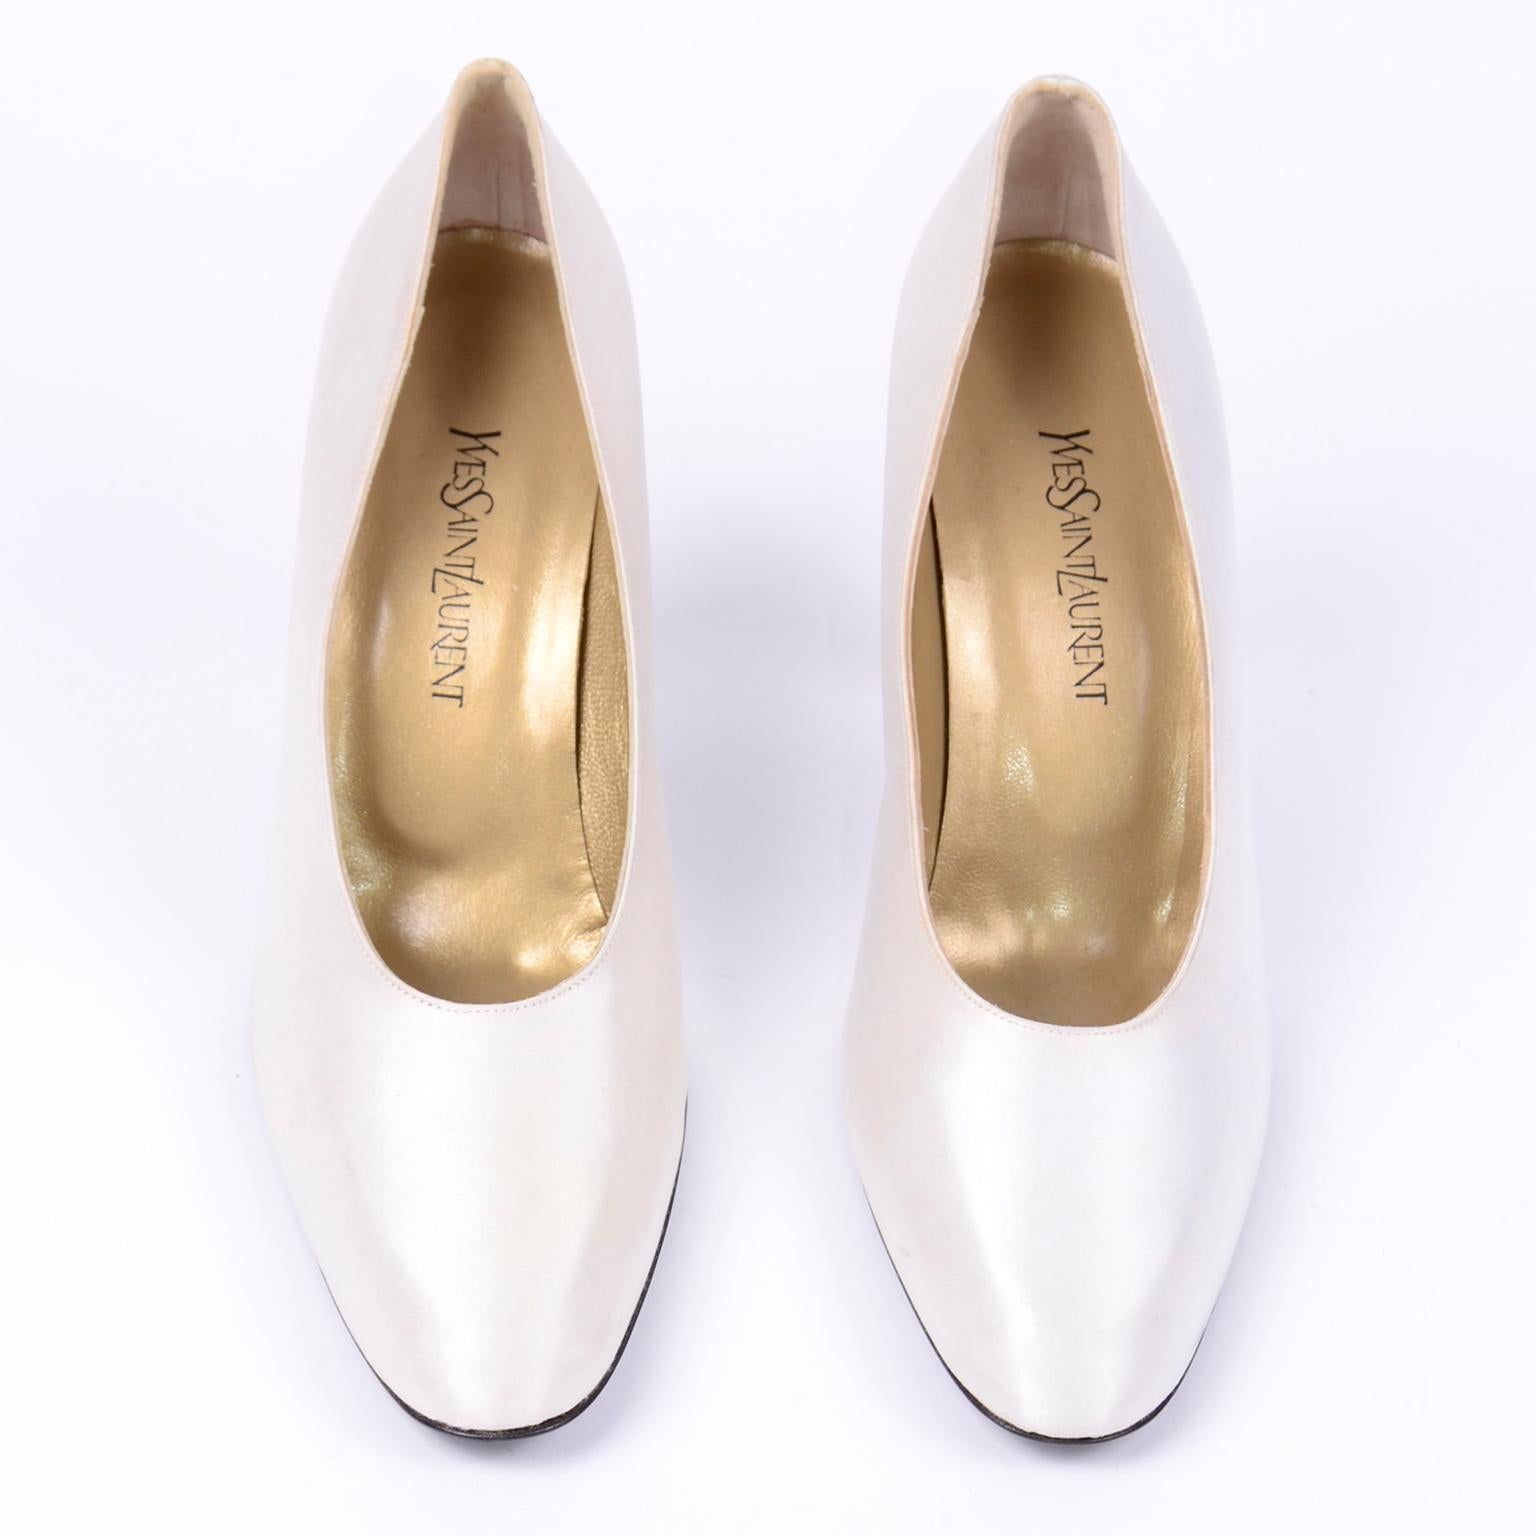 These classic Yves Saint Laurent vintage white pumps would be perfect to wear to that Summer special event or as bridal wedding shoes. These vintage YSL white satin shoes have black leather soles and were never worn. There are a few smudges on satin